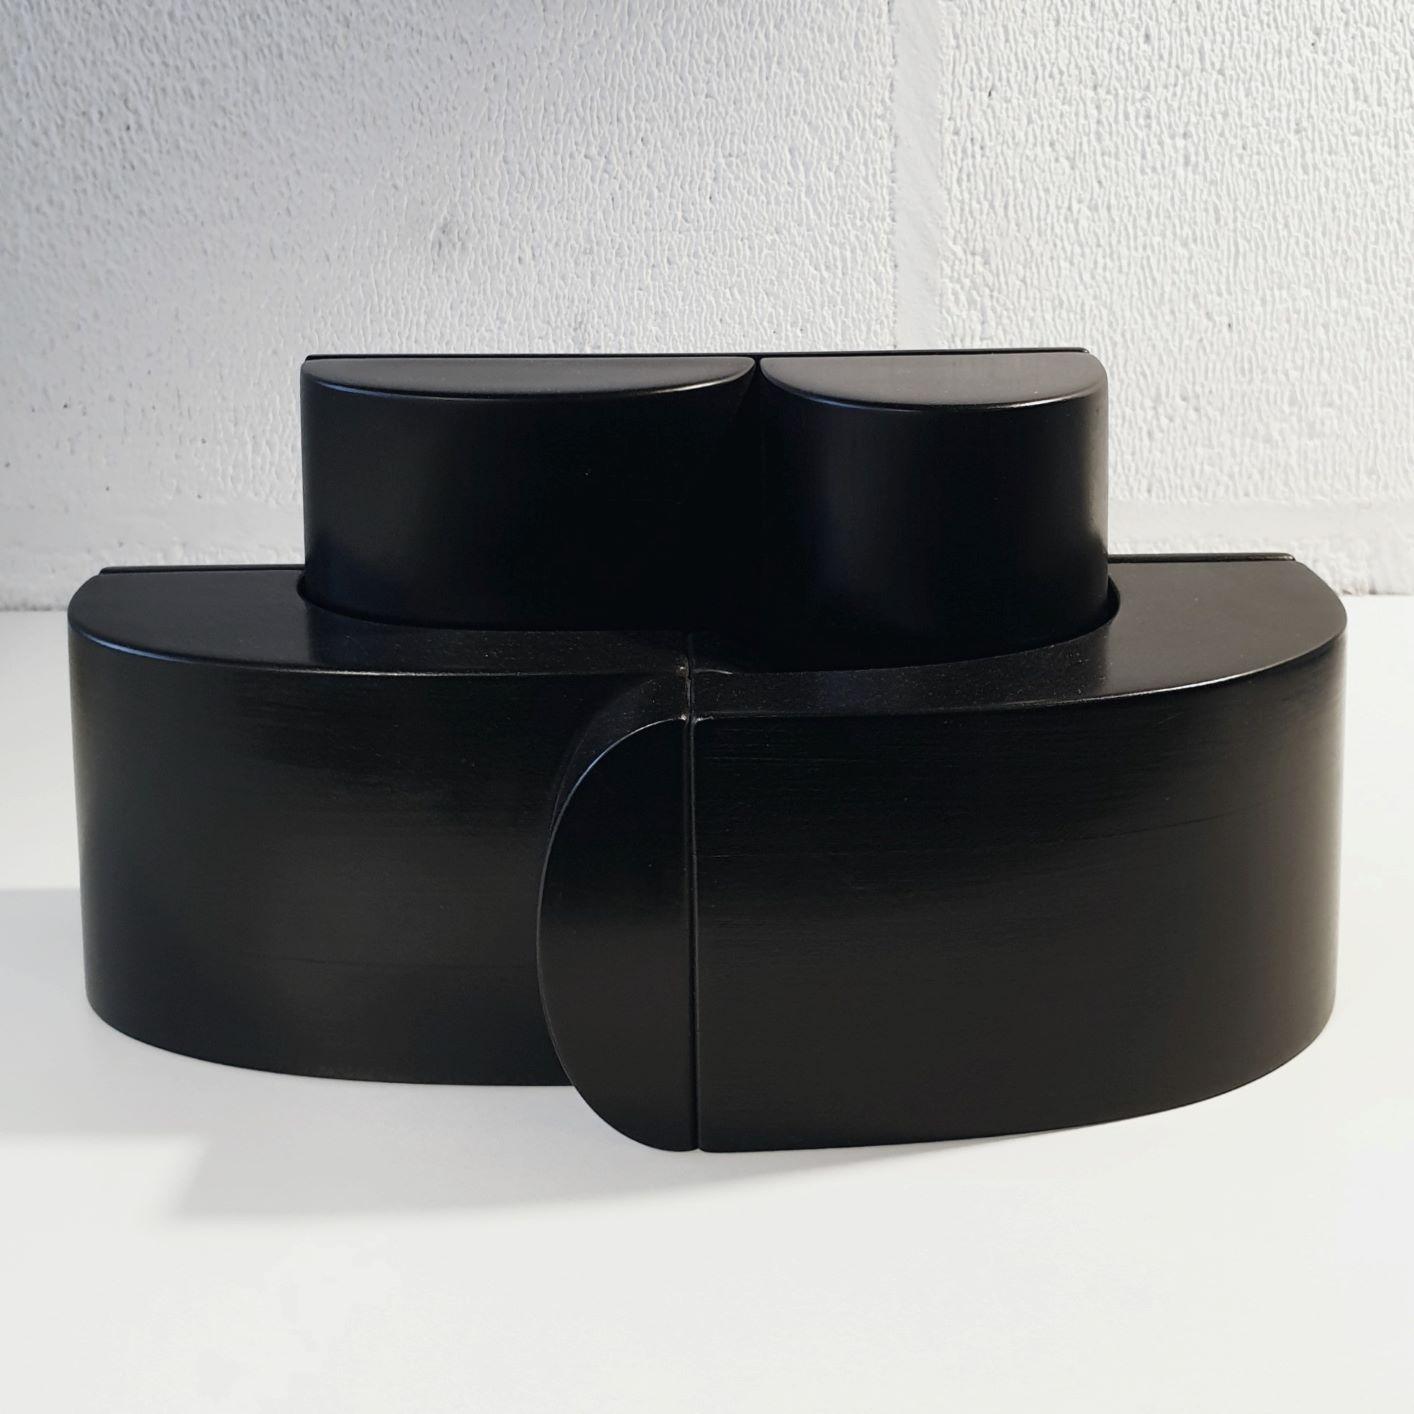 Embrasse - black contemporary modern abstract geometric wood sculpture